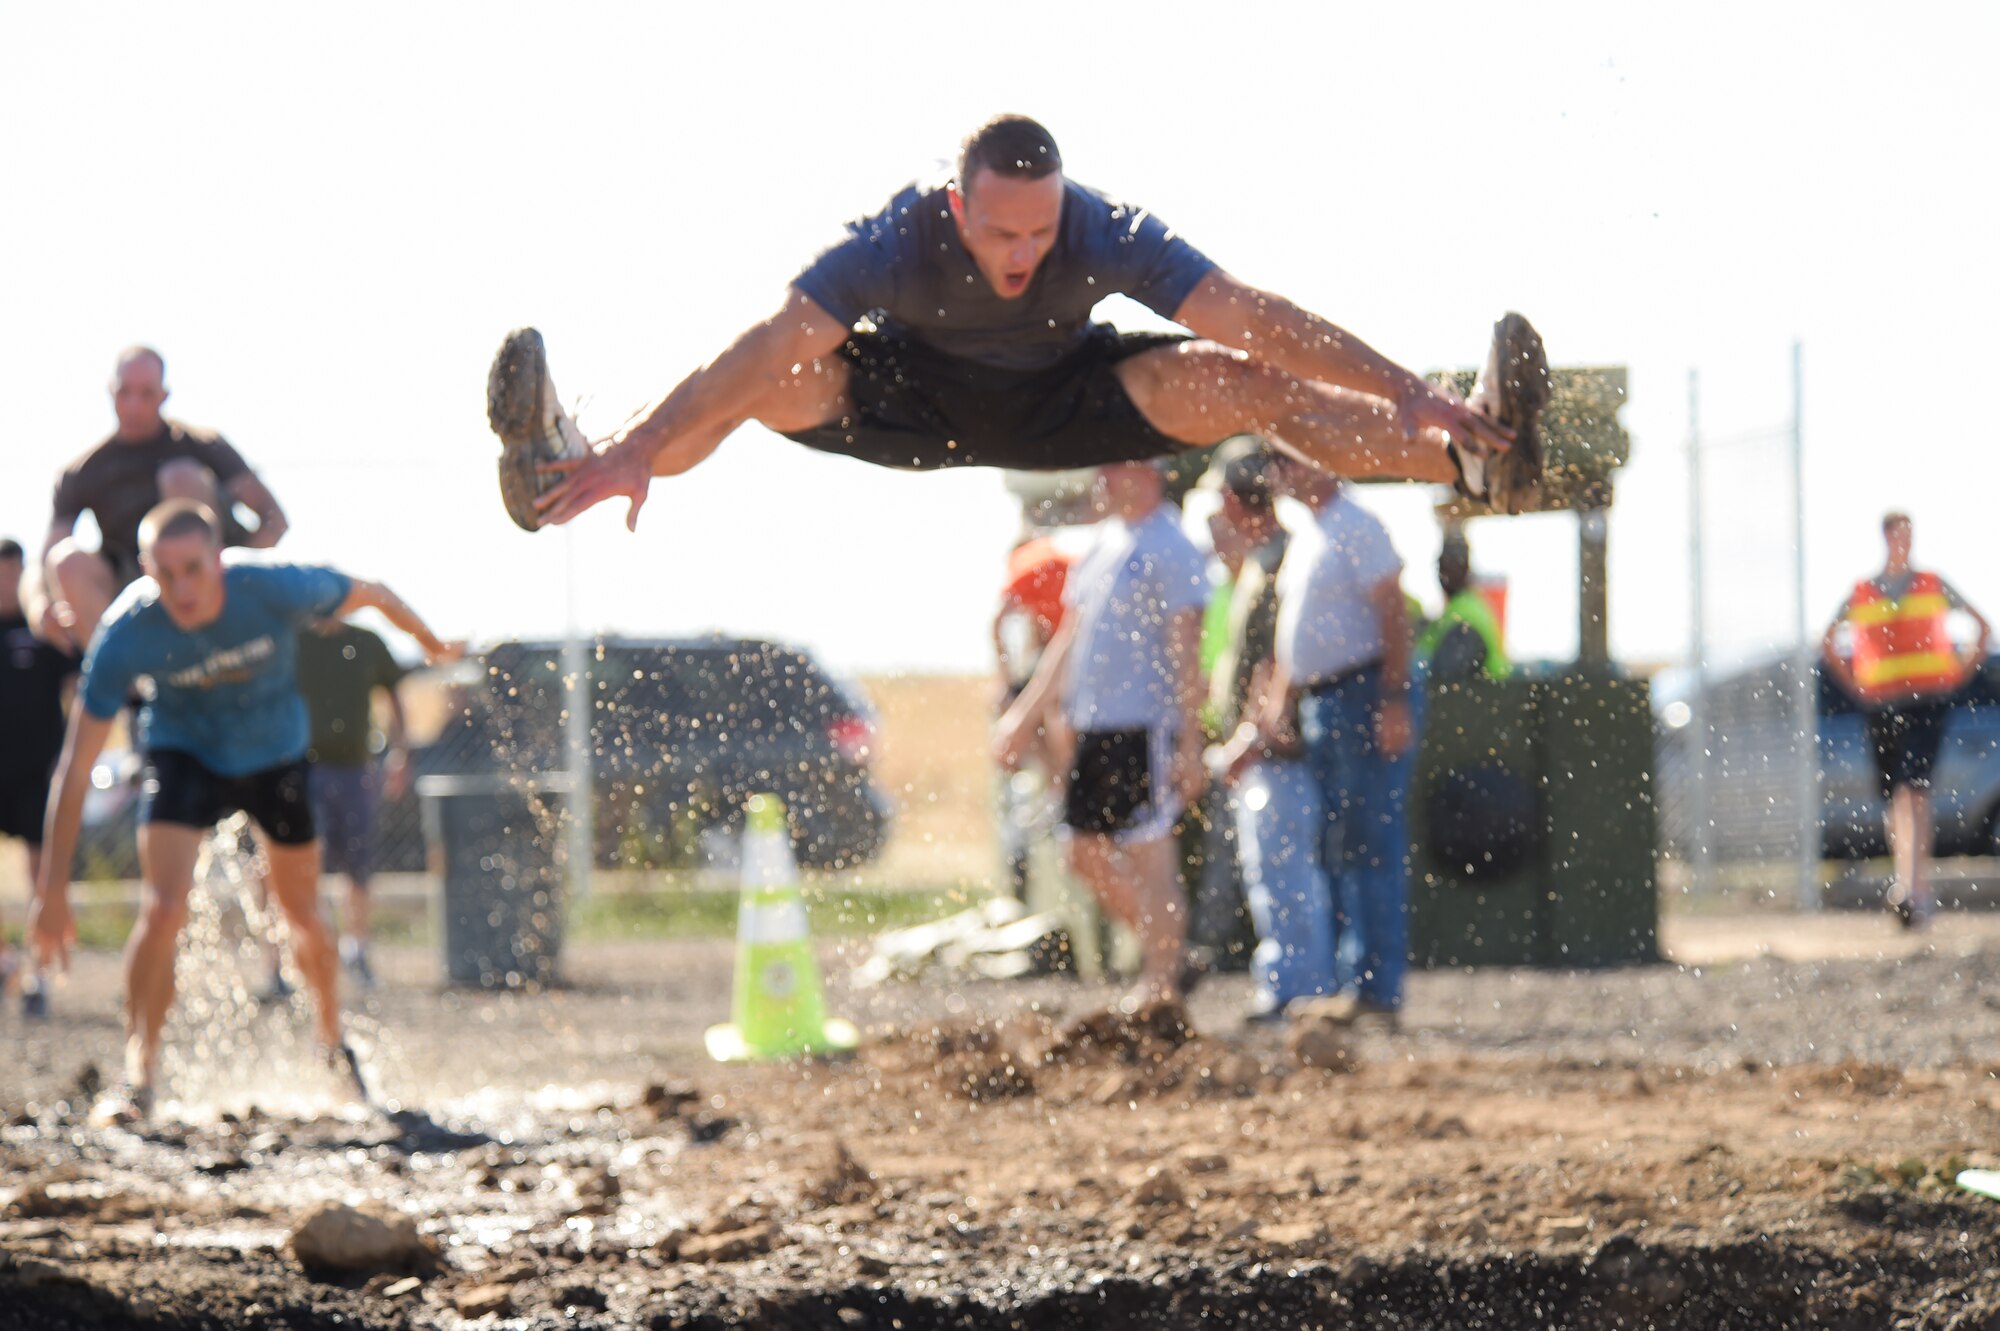 Capt. Luke McPherson jumps into a mud pit during WARFIT Sept. 25, 2014, on Buckley Air Force Base, Colo. The 460th Civil Engineer Squadron hosted the September WARFIT, which consisted of a 5K run and a mud obstacle course. WARFIT is a way for the 460th Space Wing and base partner units to get together and stay physically fit. (U.S. Air Force photo by Senior Airman Phillip Houk/Released)